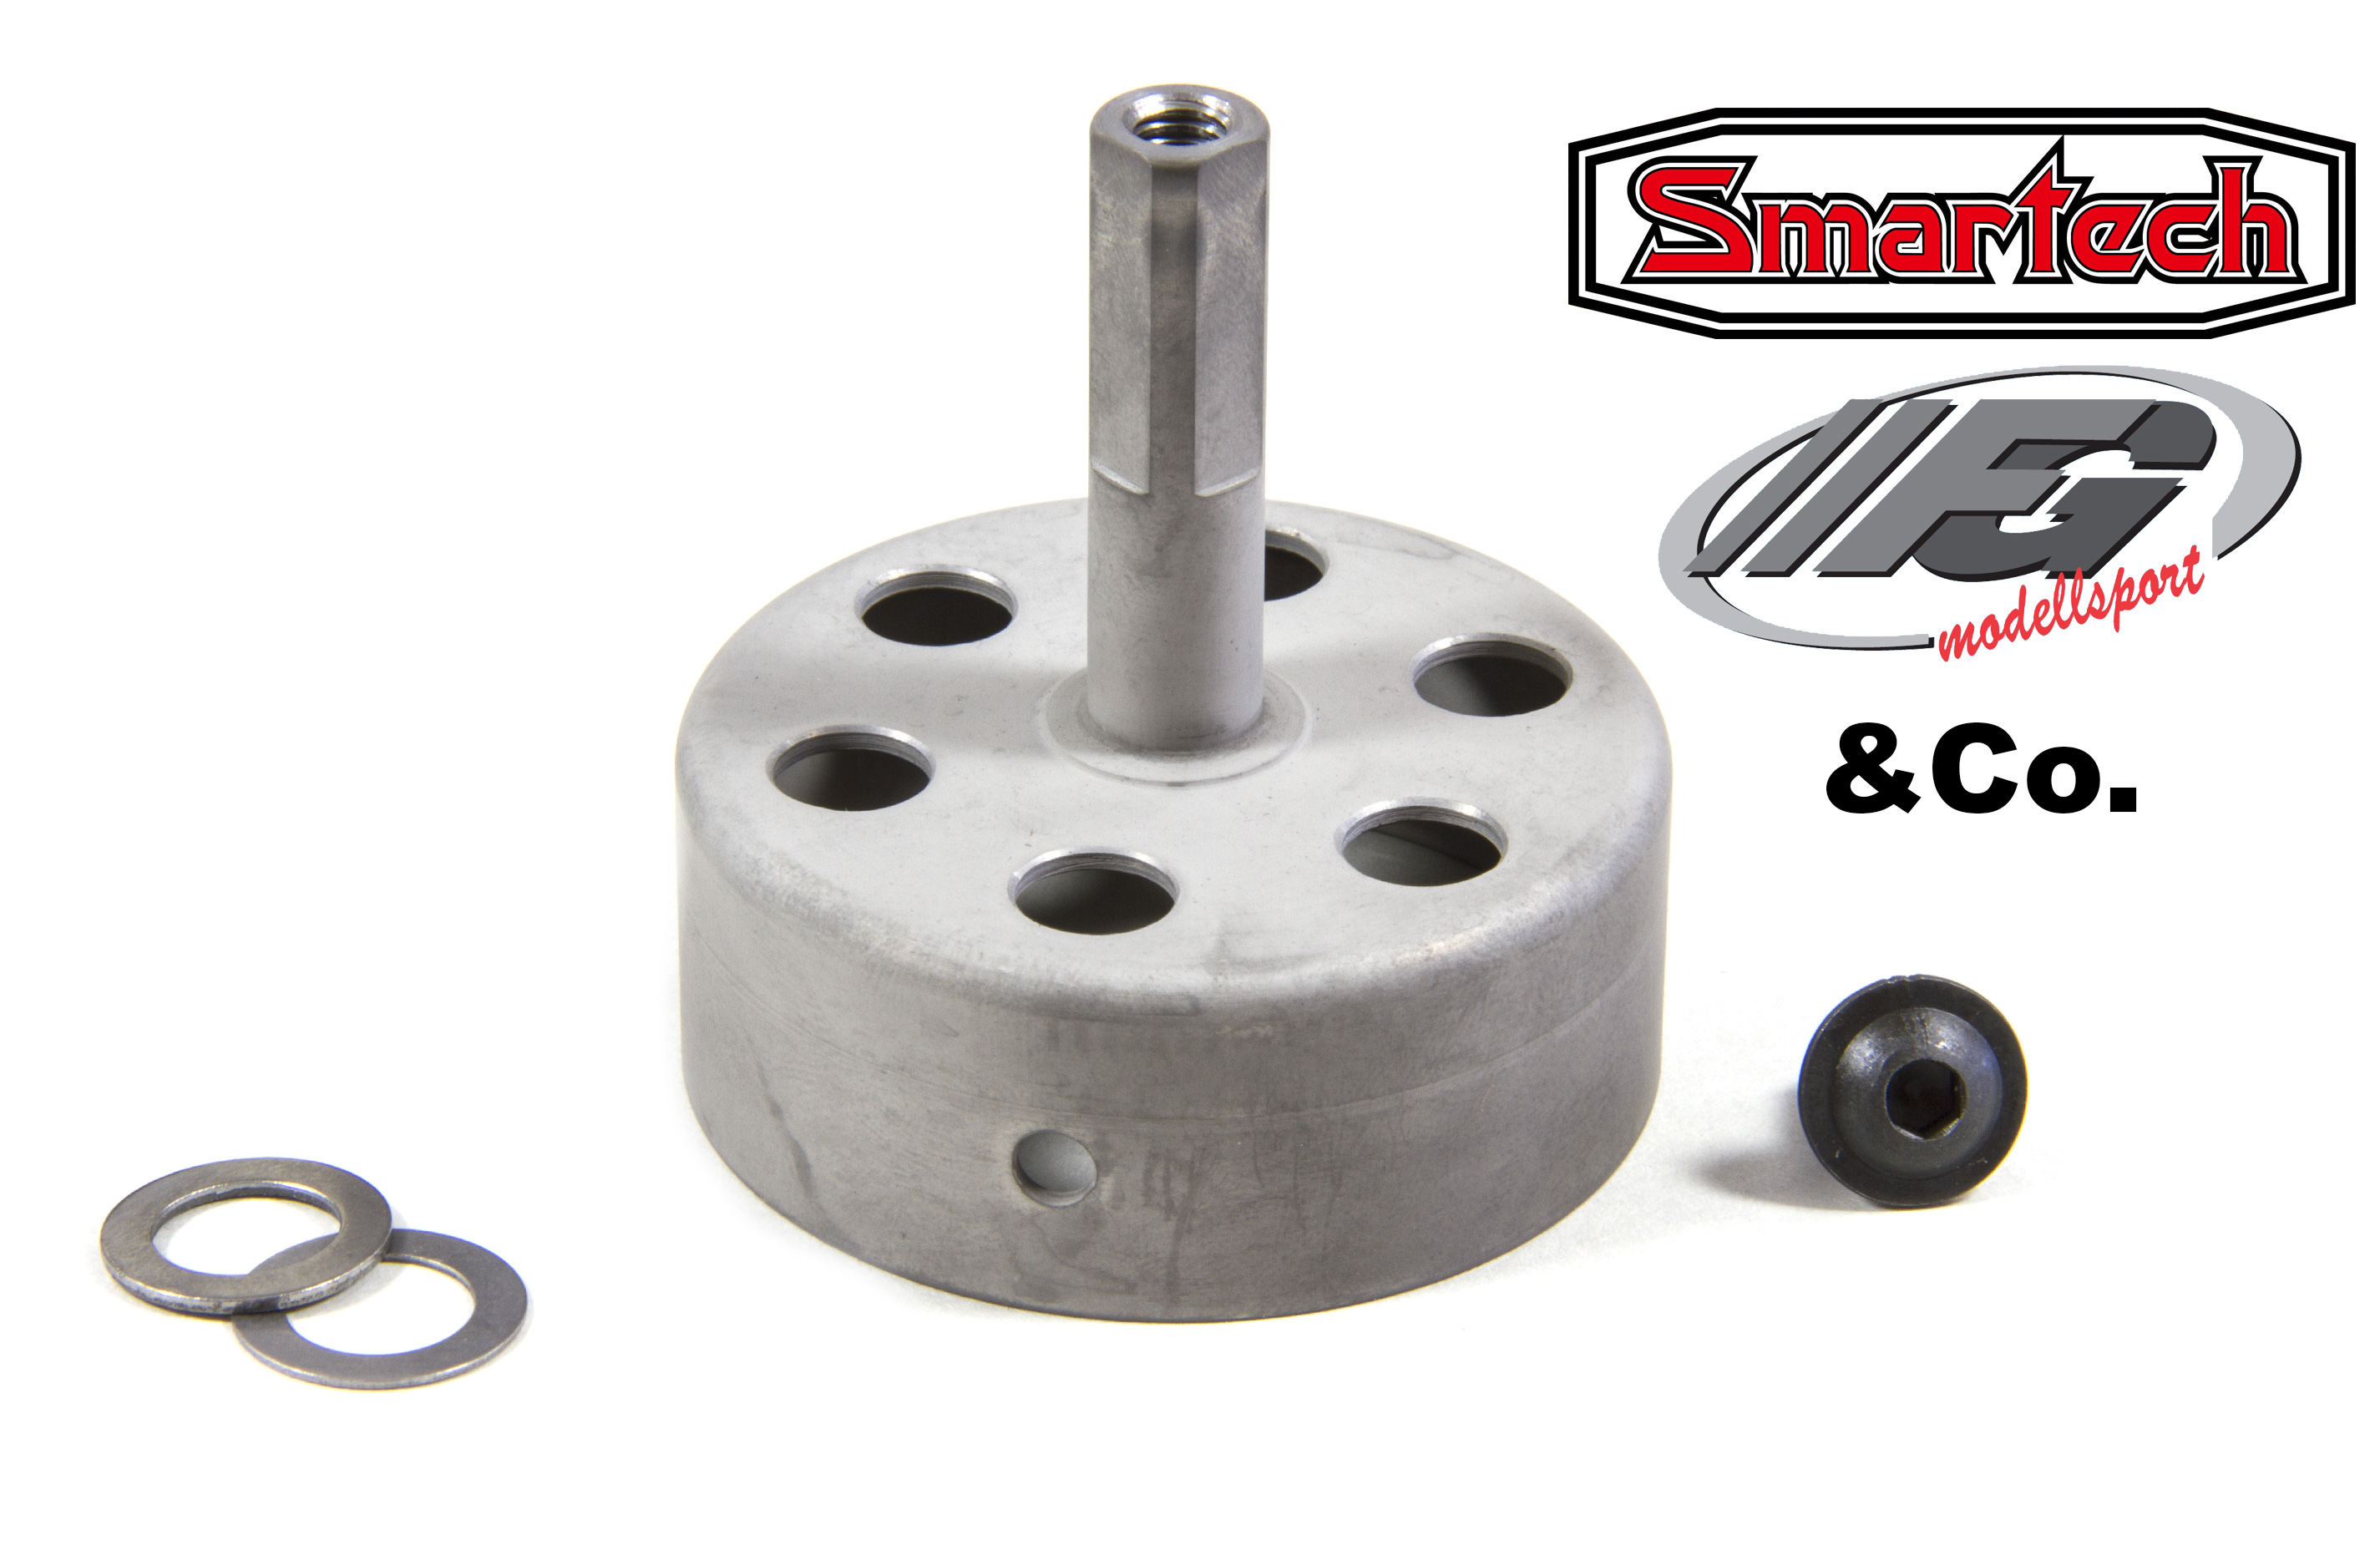 y0723 Gas-nitrited tuning clutch bell for FG, Smartech/Carson, Harm, RS5 & Co.